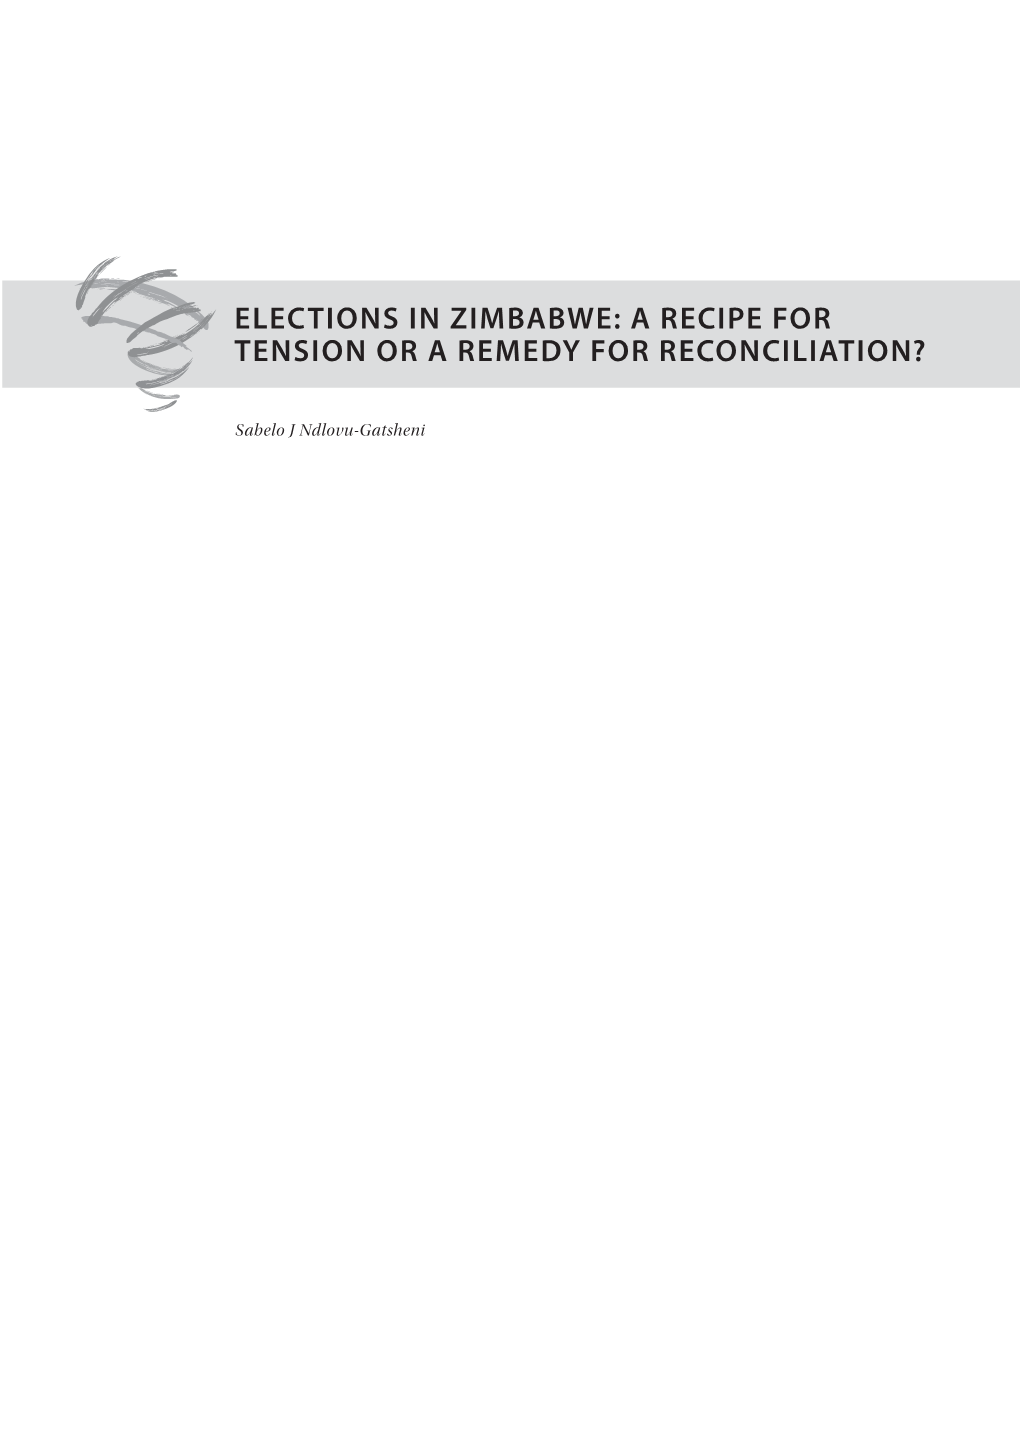 Elections in Zimbabwe: a Recipe for Tension Or a Remedy for Reconciliation?